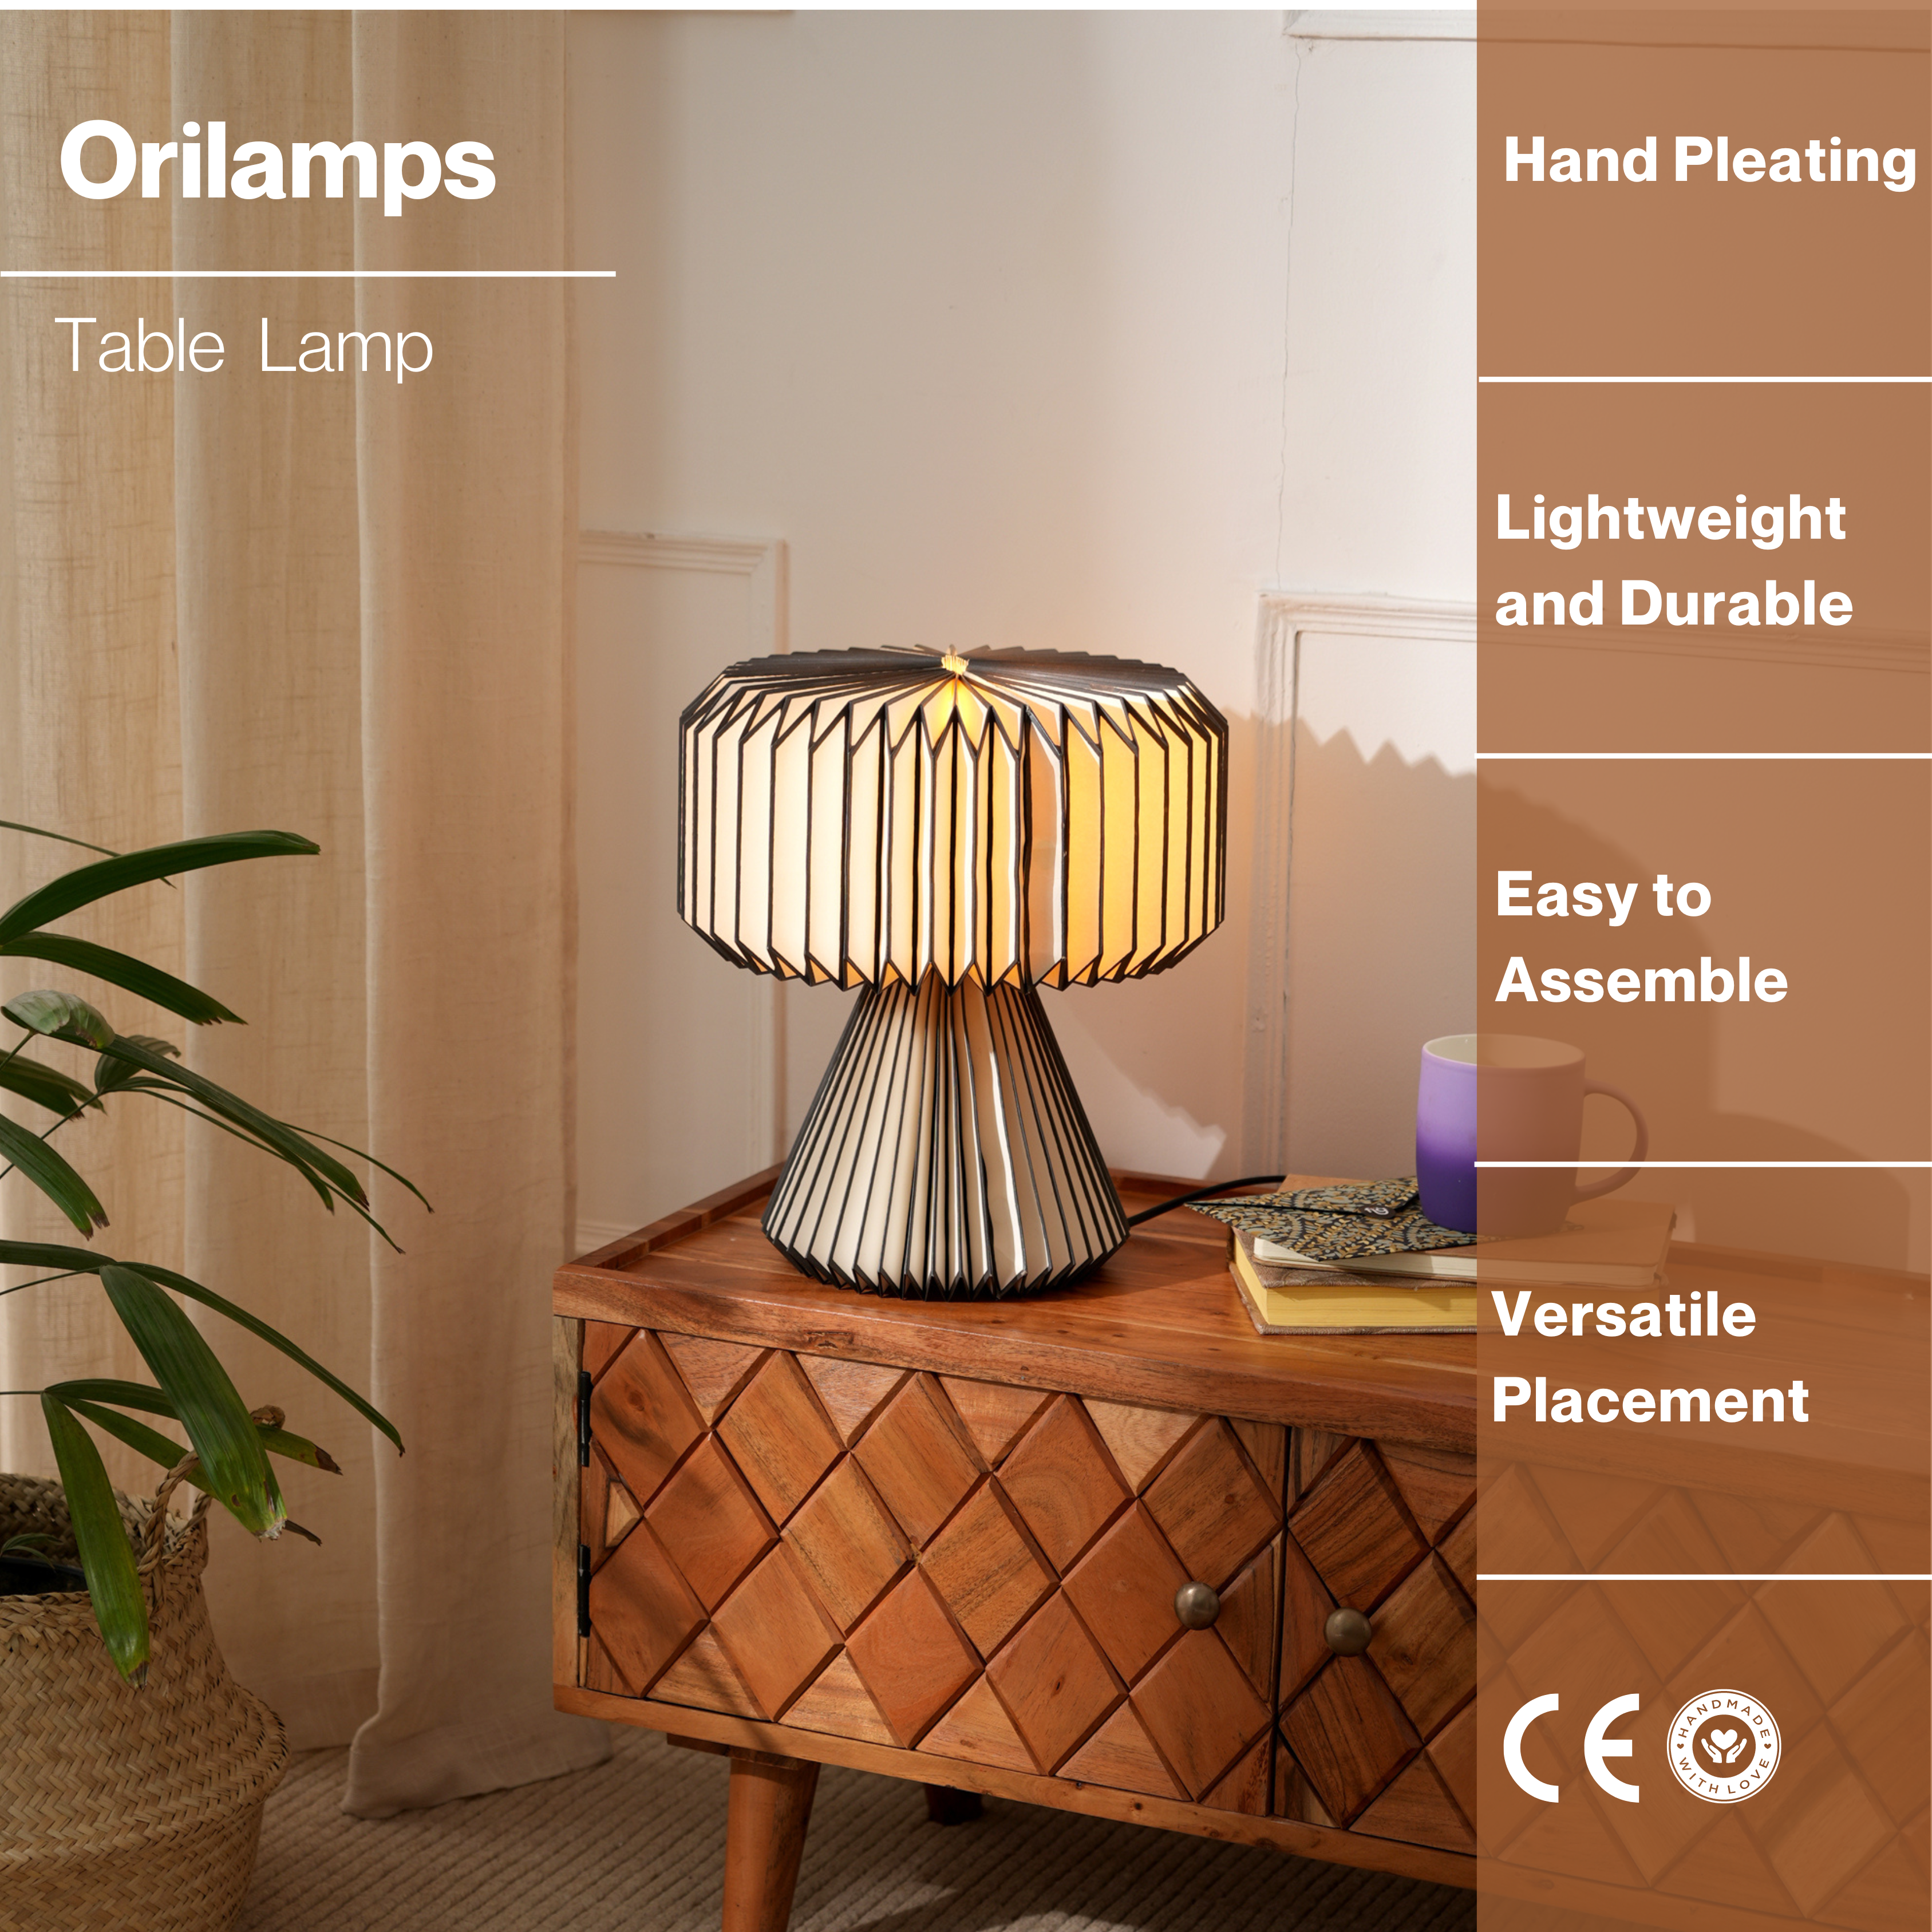 Orilamp Table Lamp - Bedside Desk Lamp, Table & Cozy Console Bedside Lamp